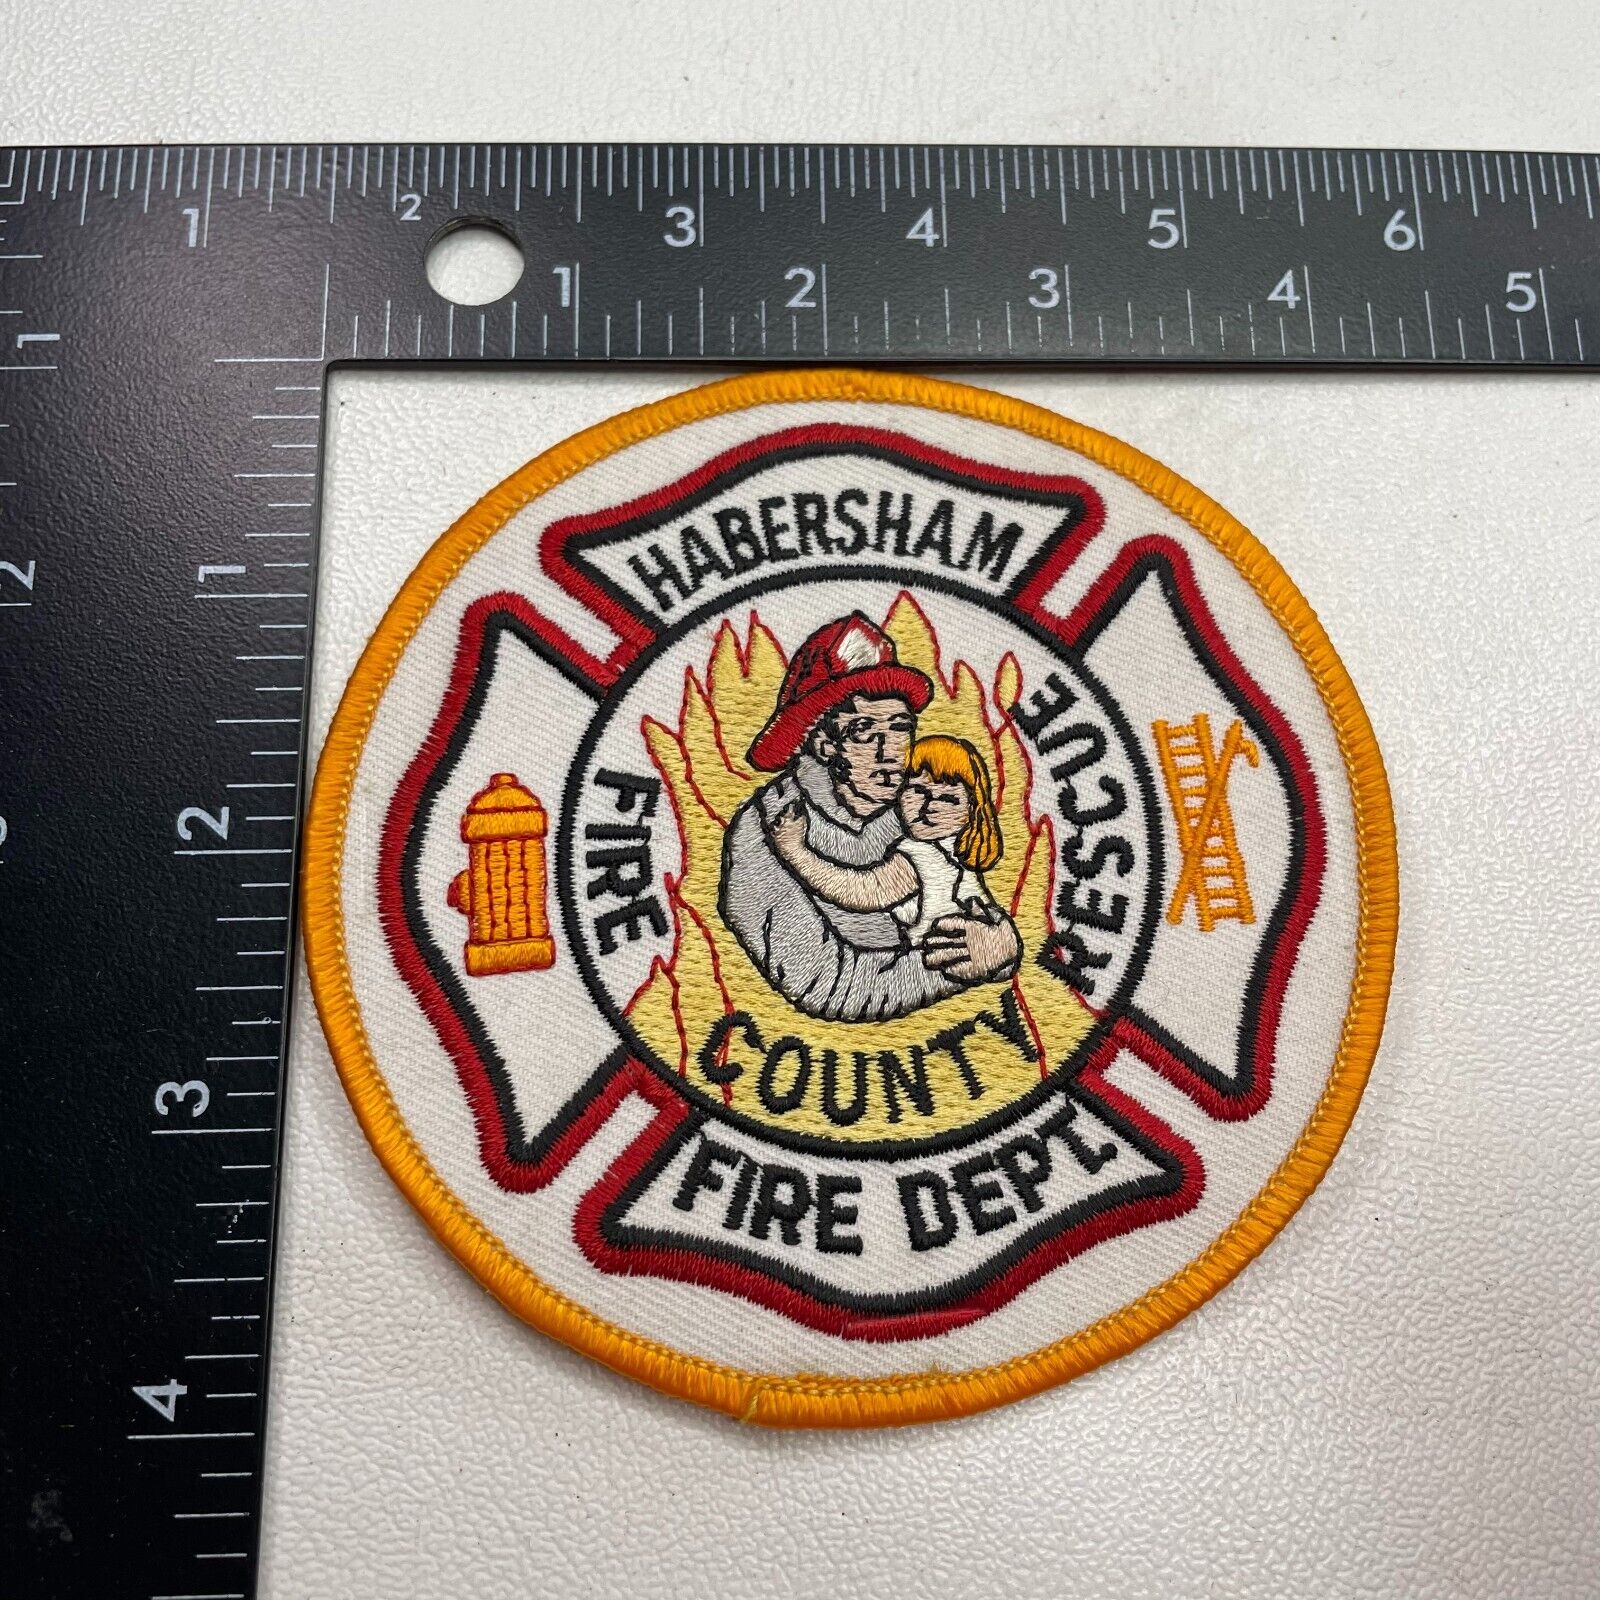 HABERSHAM COUNTRY FIRE & RESCUE Fire Department Shoulder Patch 27NS